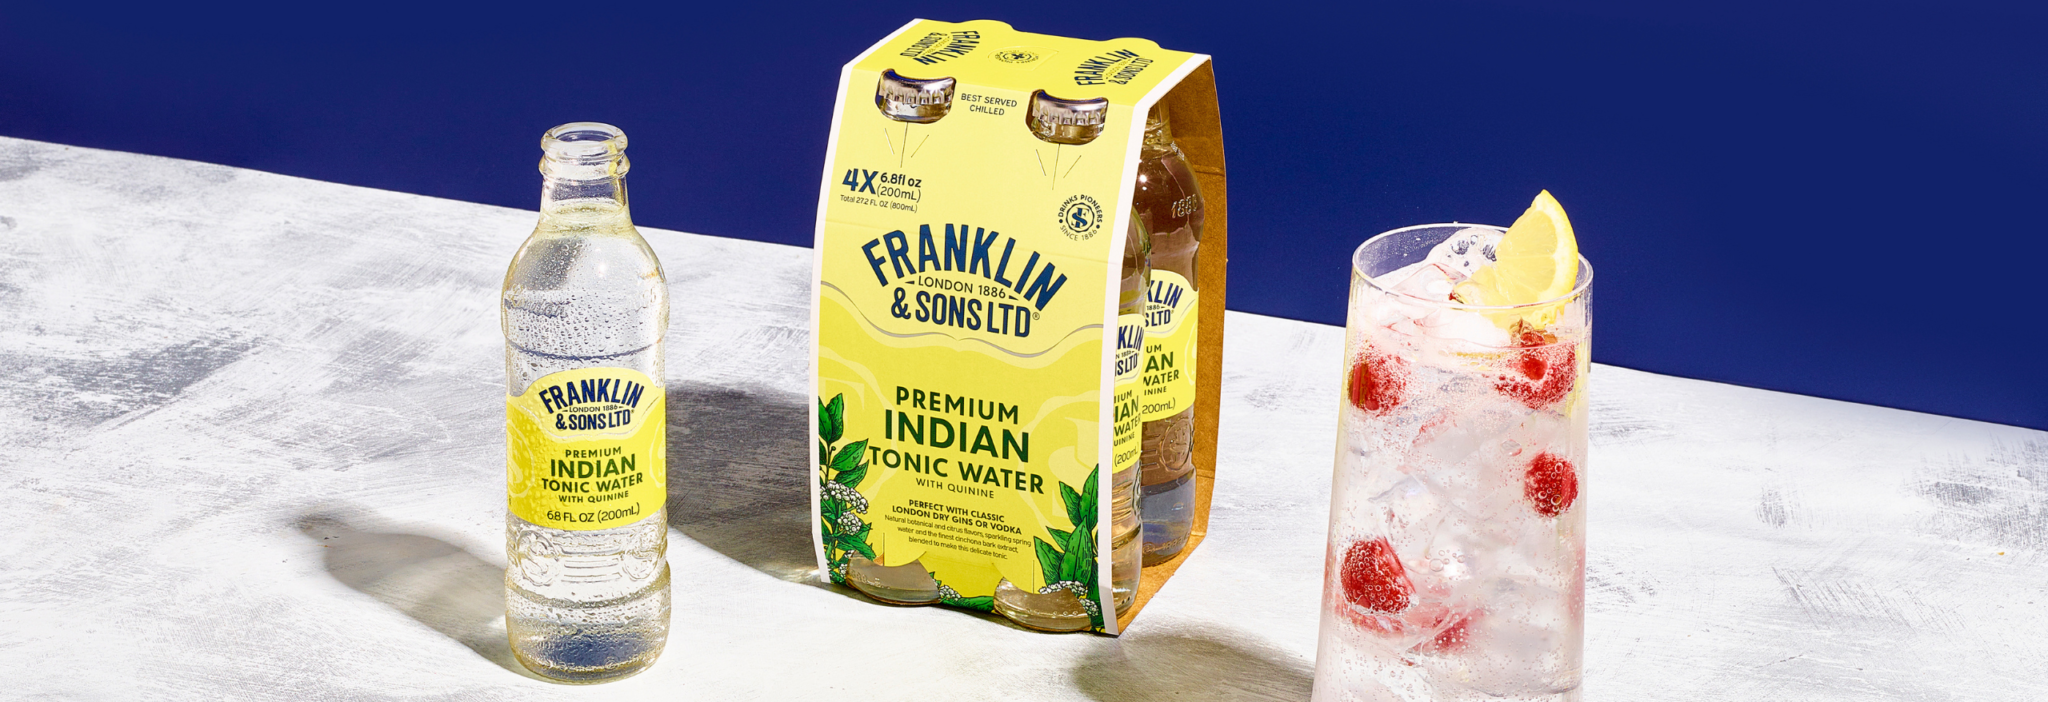 Franklin & Sons Premium Indian Tonic Water with quinine used in a cocktail that has raspberries as the garnish in a highball glass | Franklin & Sons